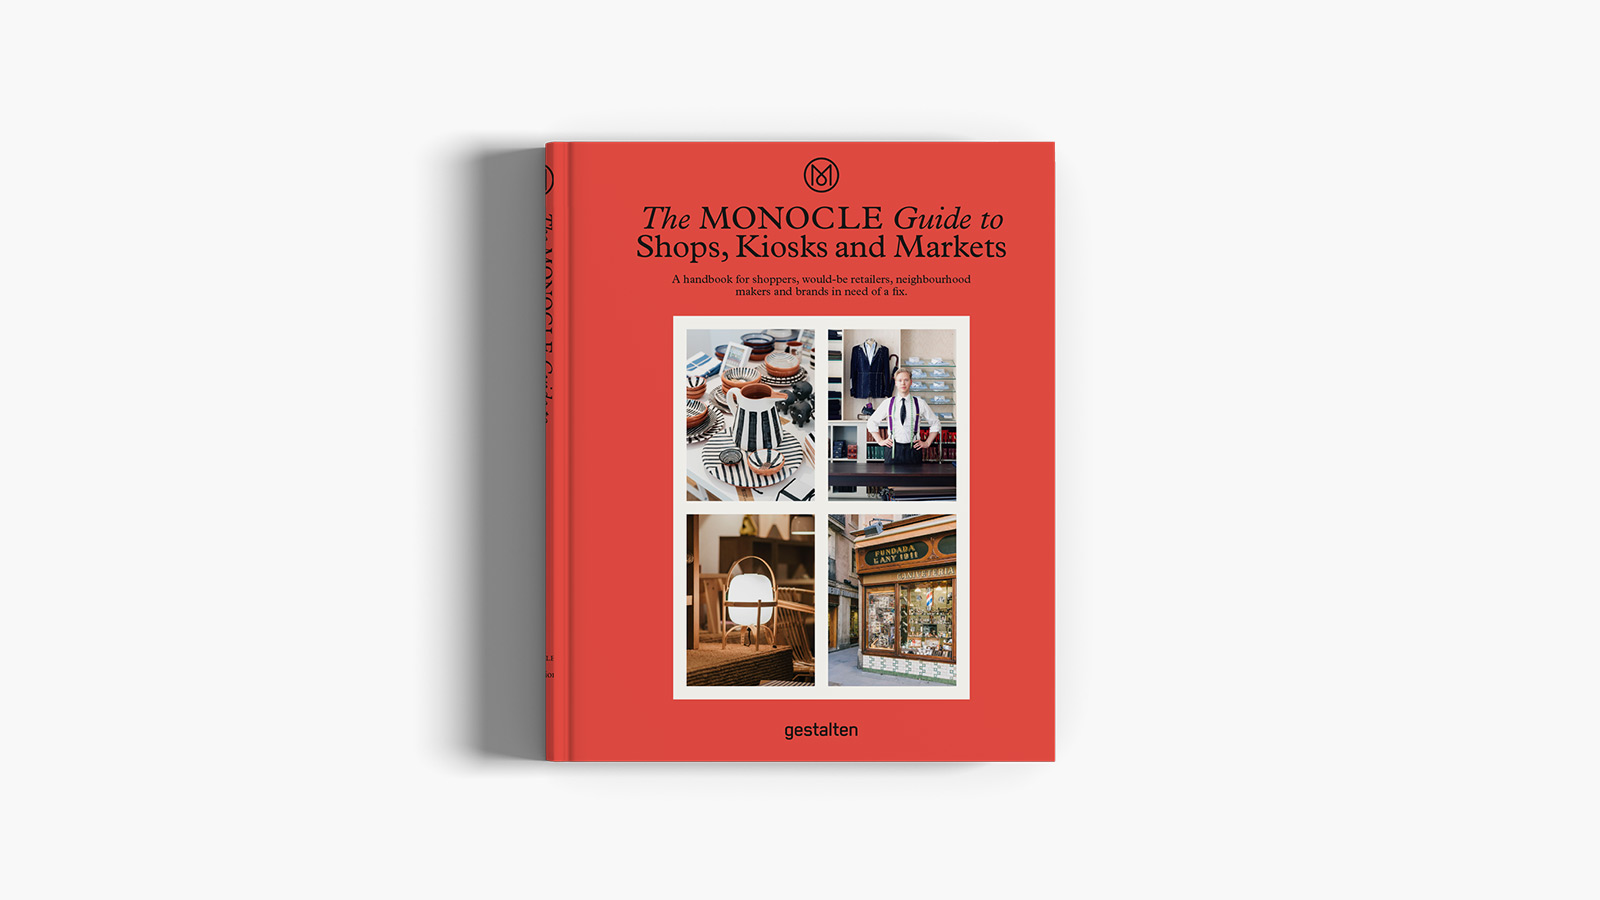 ‘The MONOCLE Guide to Shops, Kiosks and Markets’